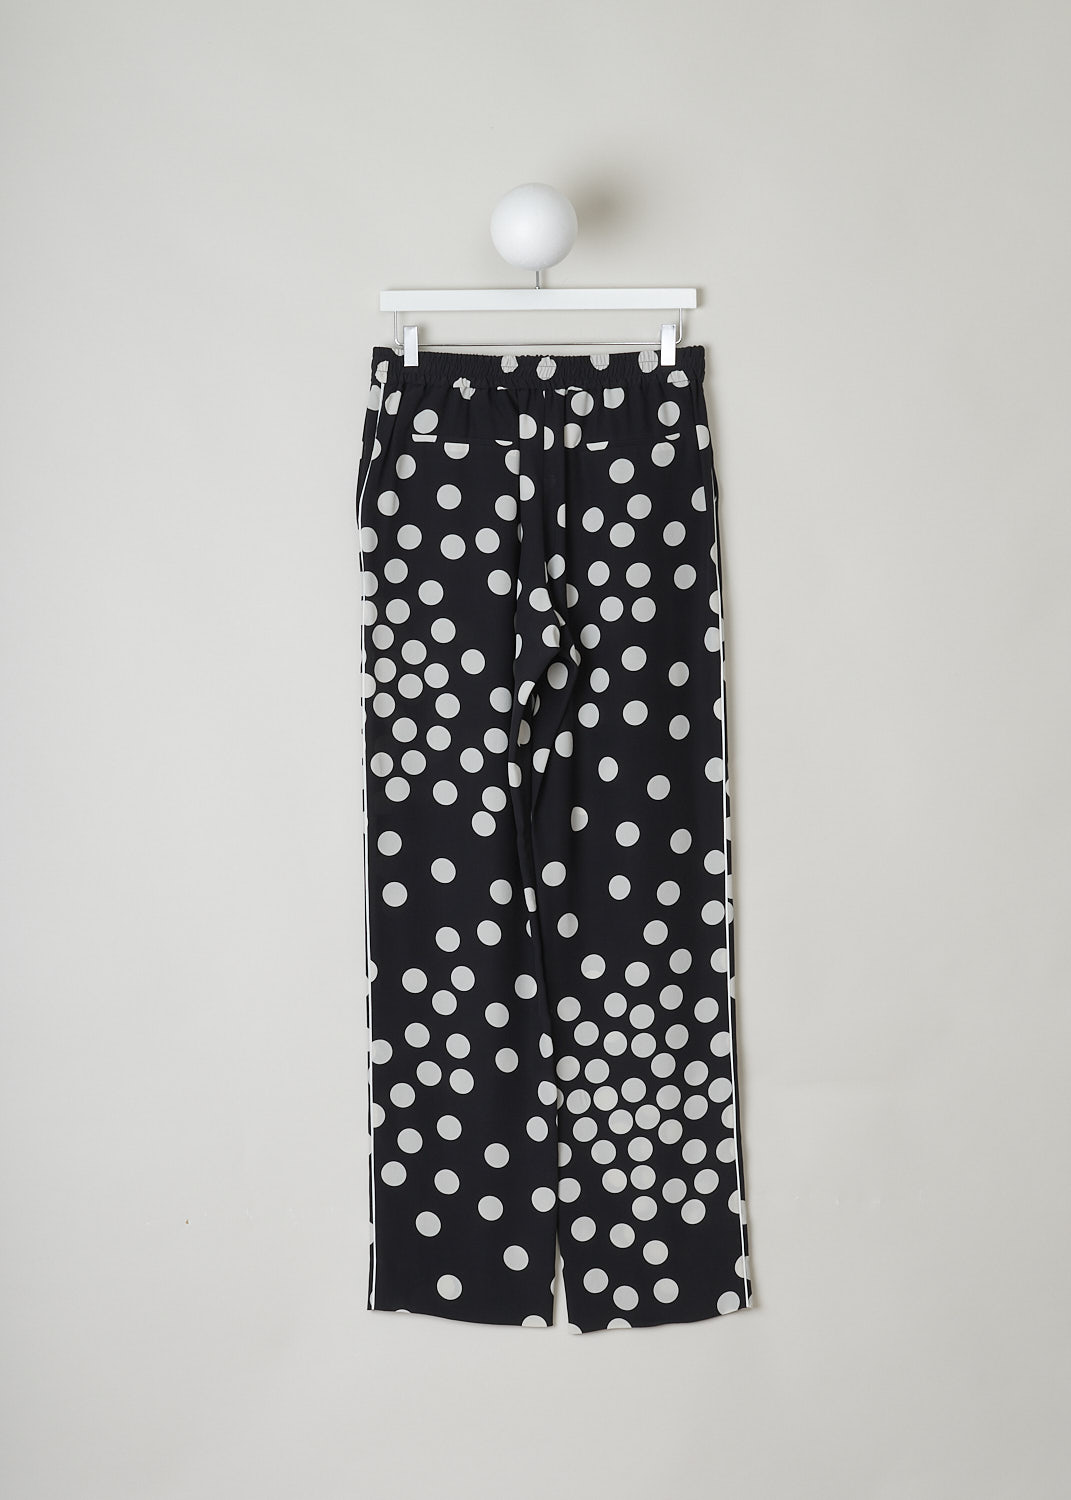 VALENTINO, HIGH WAISTED BLACK PANTS WITH WHITE DOTS, VB3RB43565N_0NA, Black, White, Print, Back, These high waisted black silk pants have an irregular doted print in white. These slip-on pants have an elasticated waistline with a drawstring on the inside. The straight, ankle length pant legs have white piping along side seams. In the front, these pants have slanted pockets and in the back welt pockets can be found.
